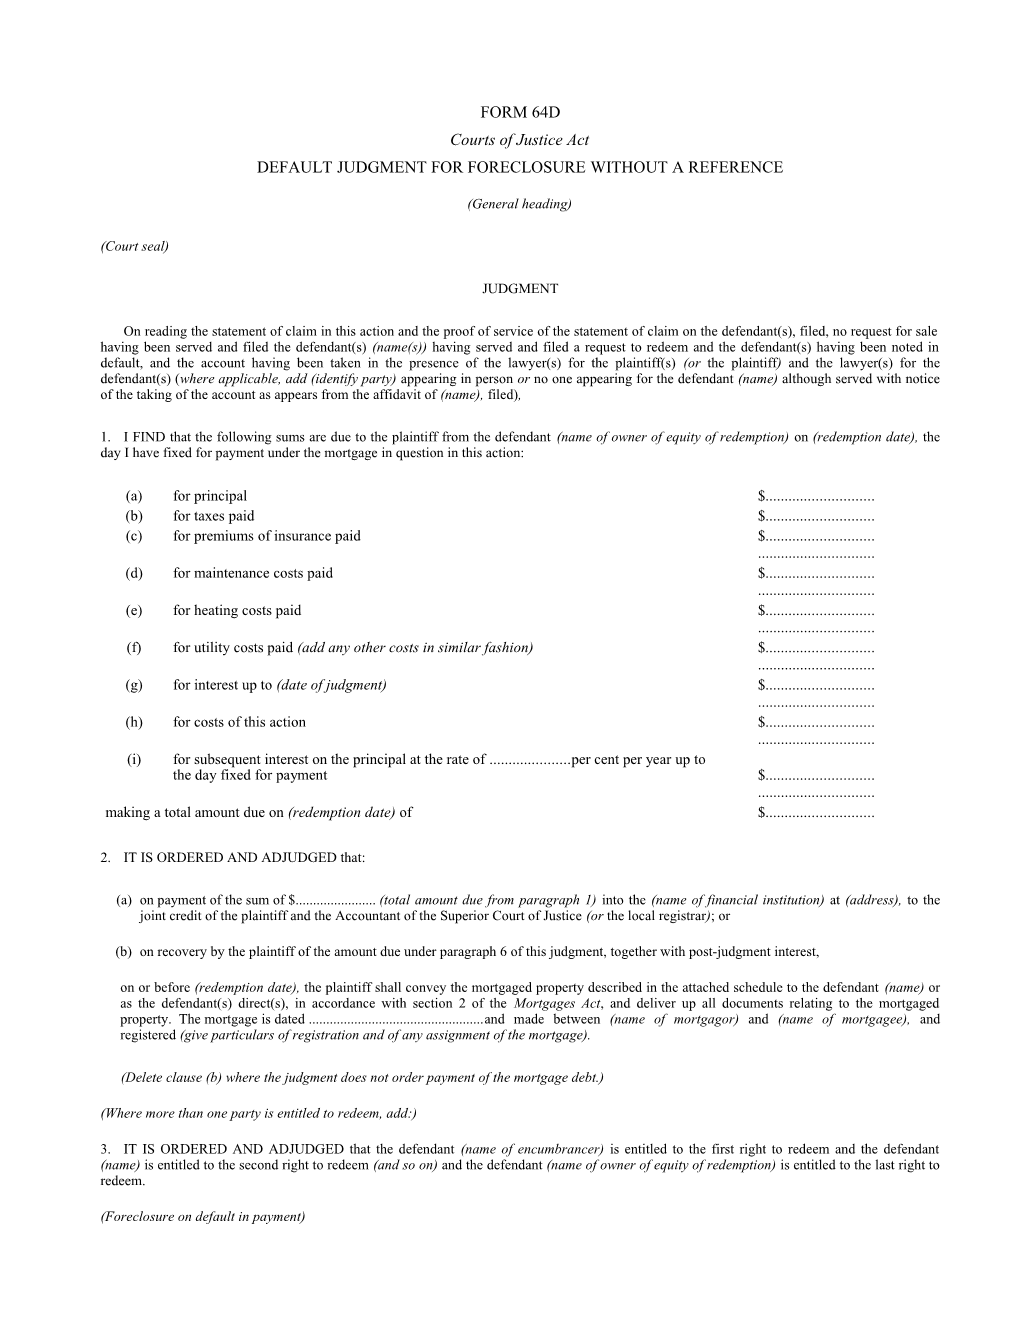 Form 64D Default Judgment for Foreclosure Without a Reference